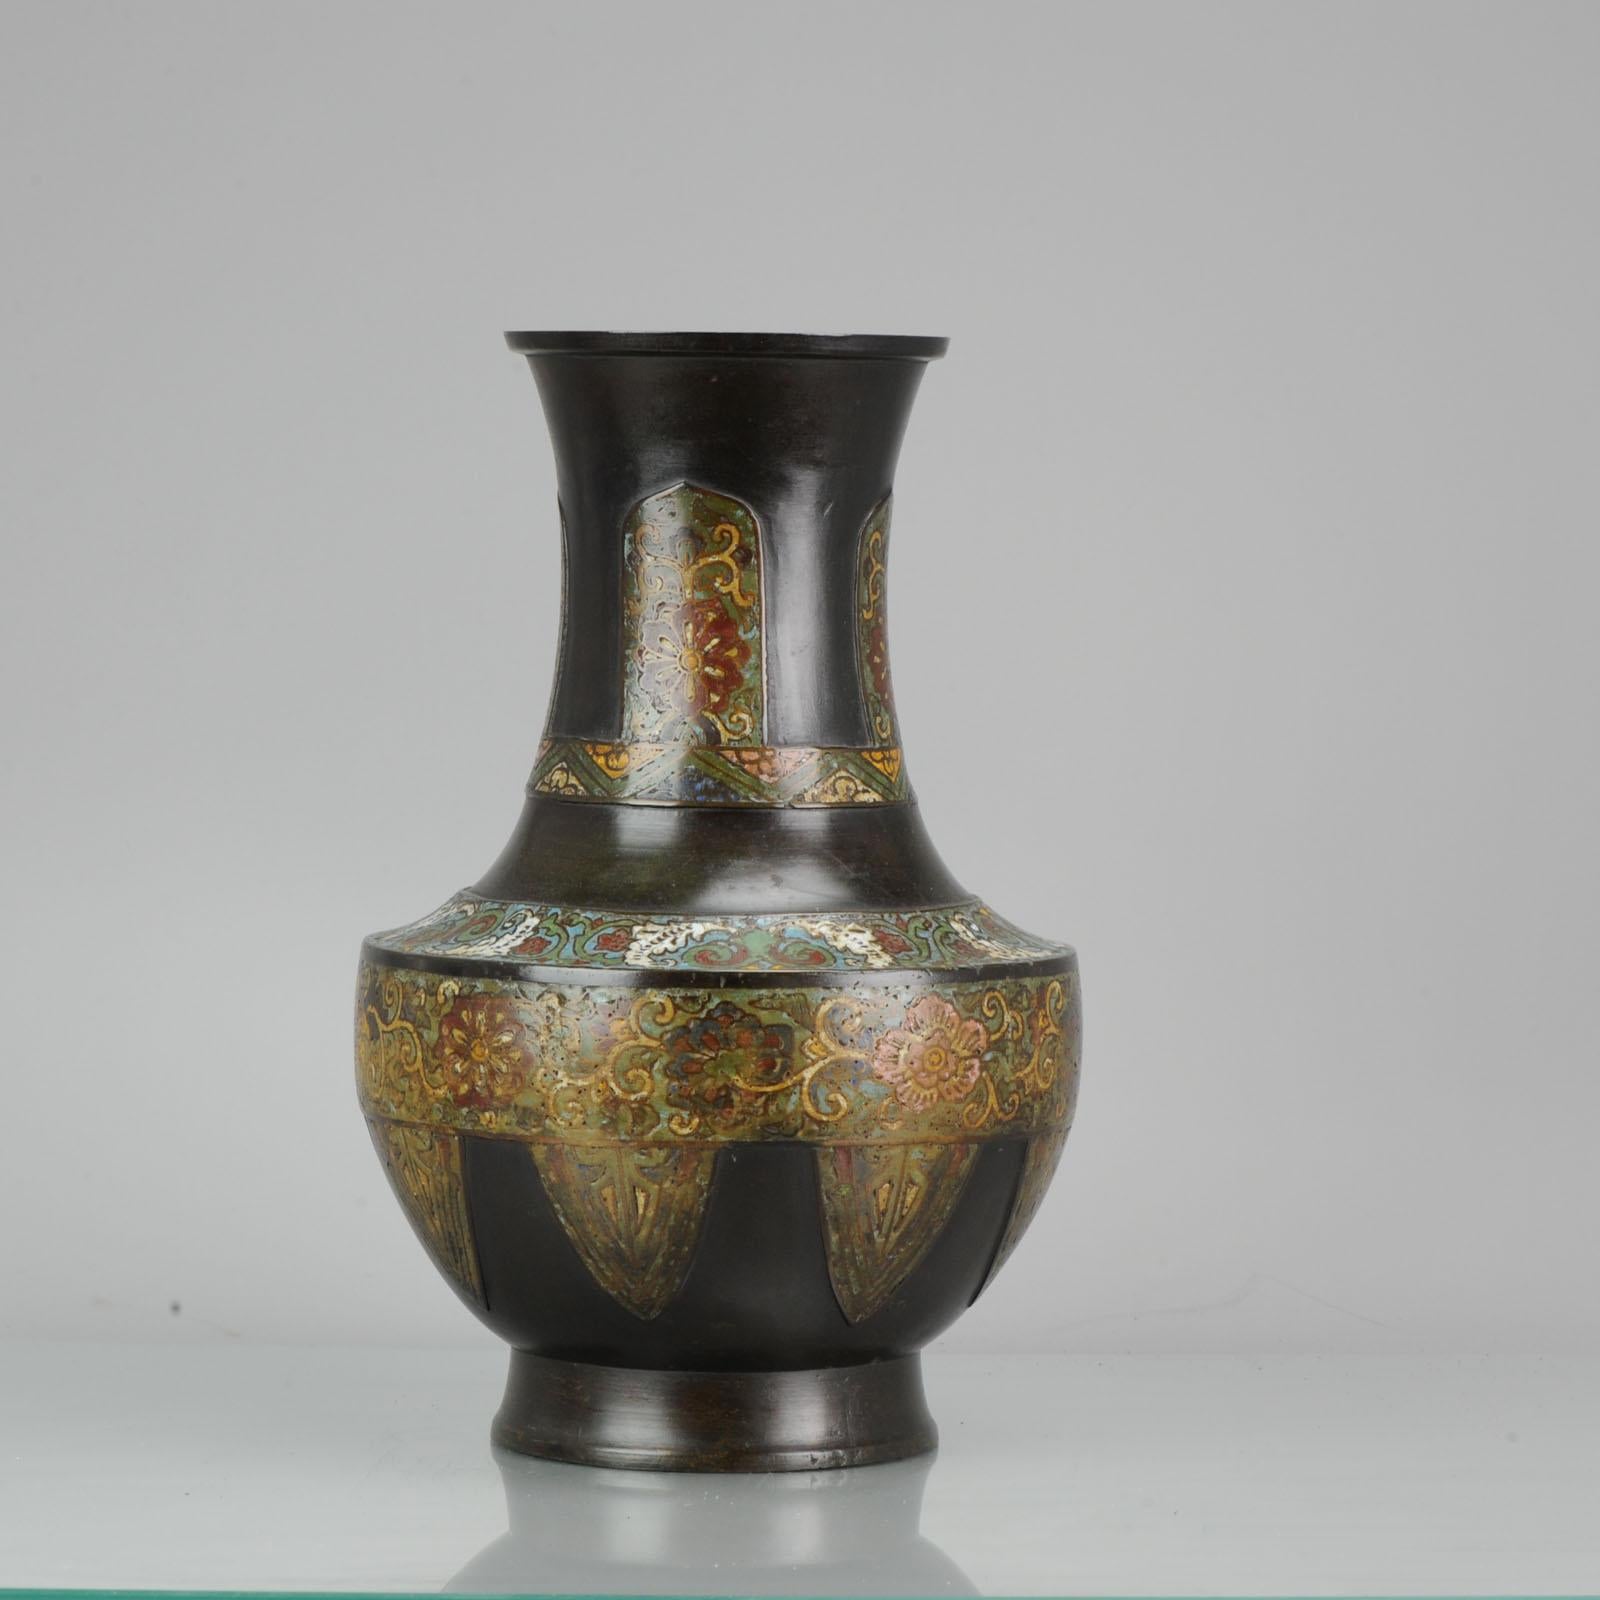 Antique Ca 1900 Japanese Bronze Vase Flowers Home Decoration Meiji Period Japan In Good Condition For Sale In Amsterdam, Noord Holland